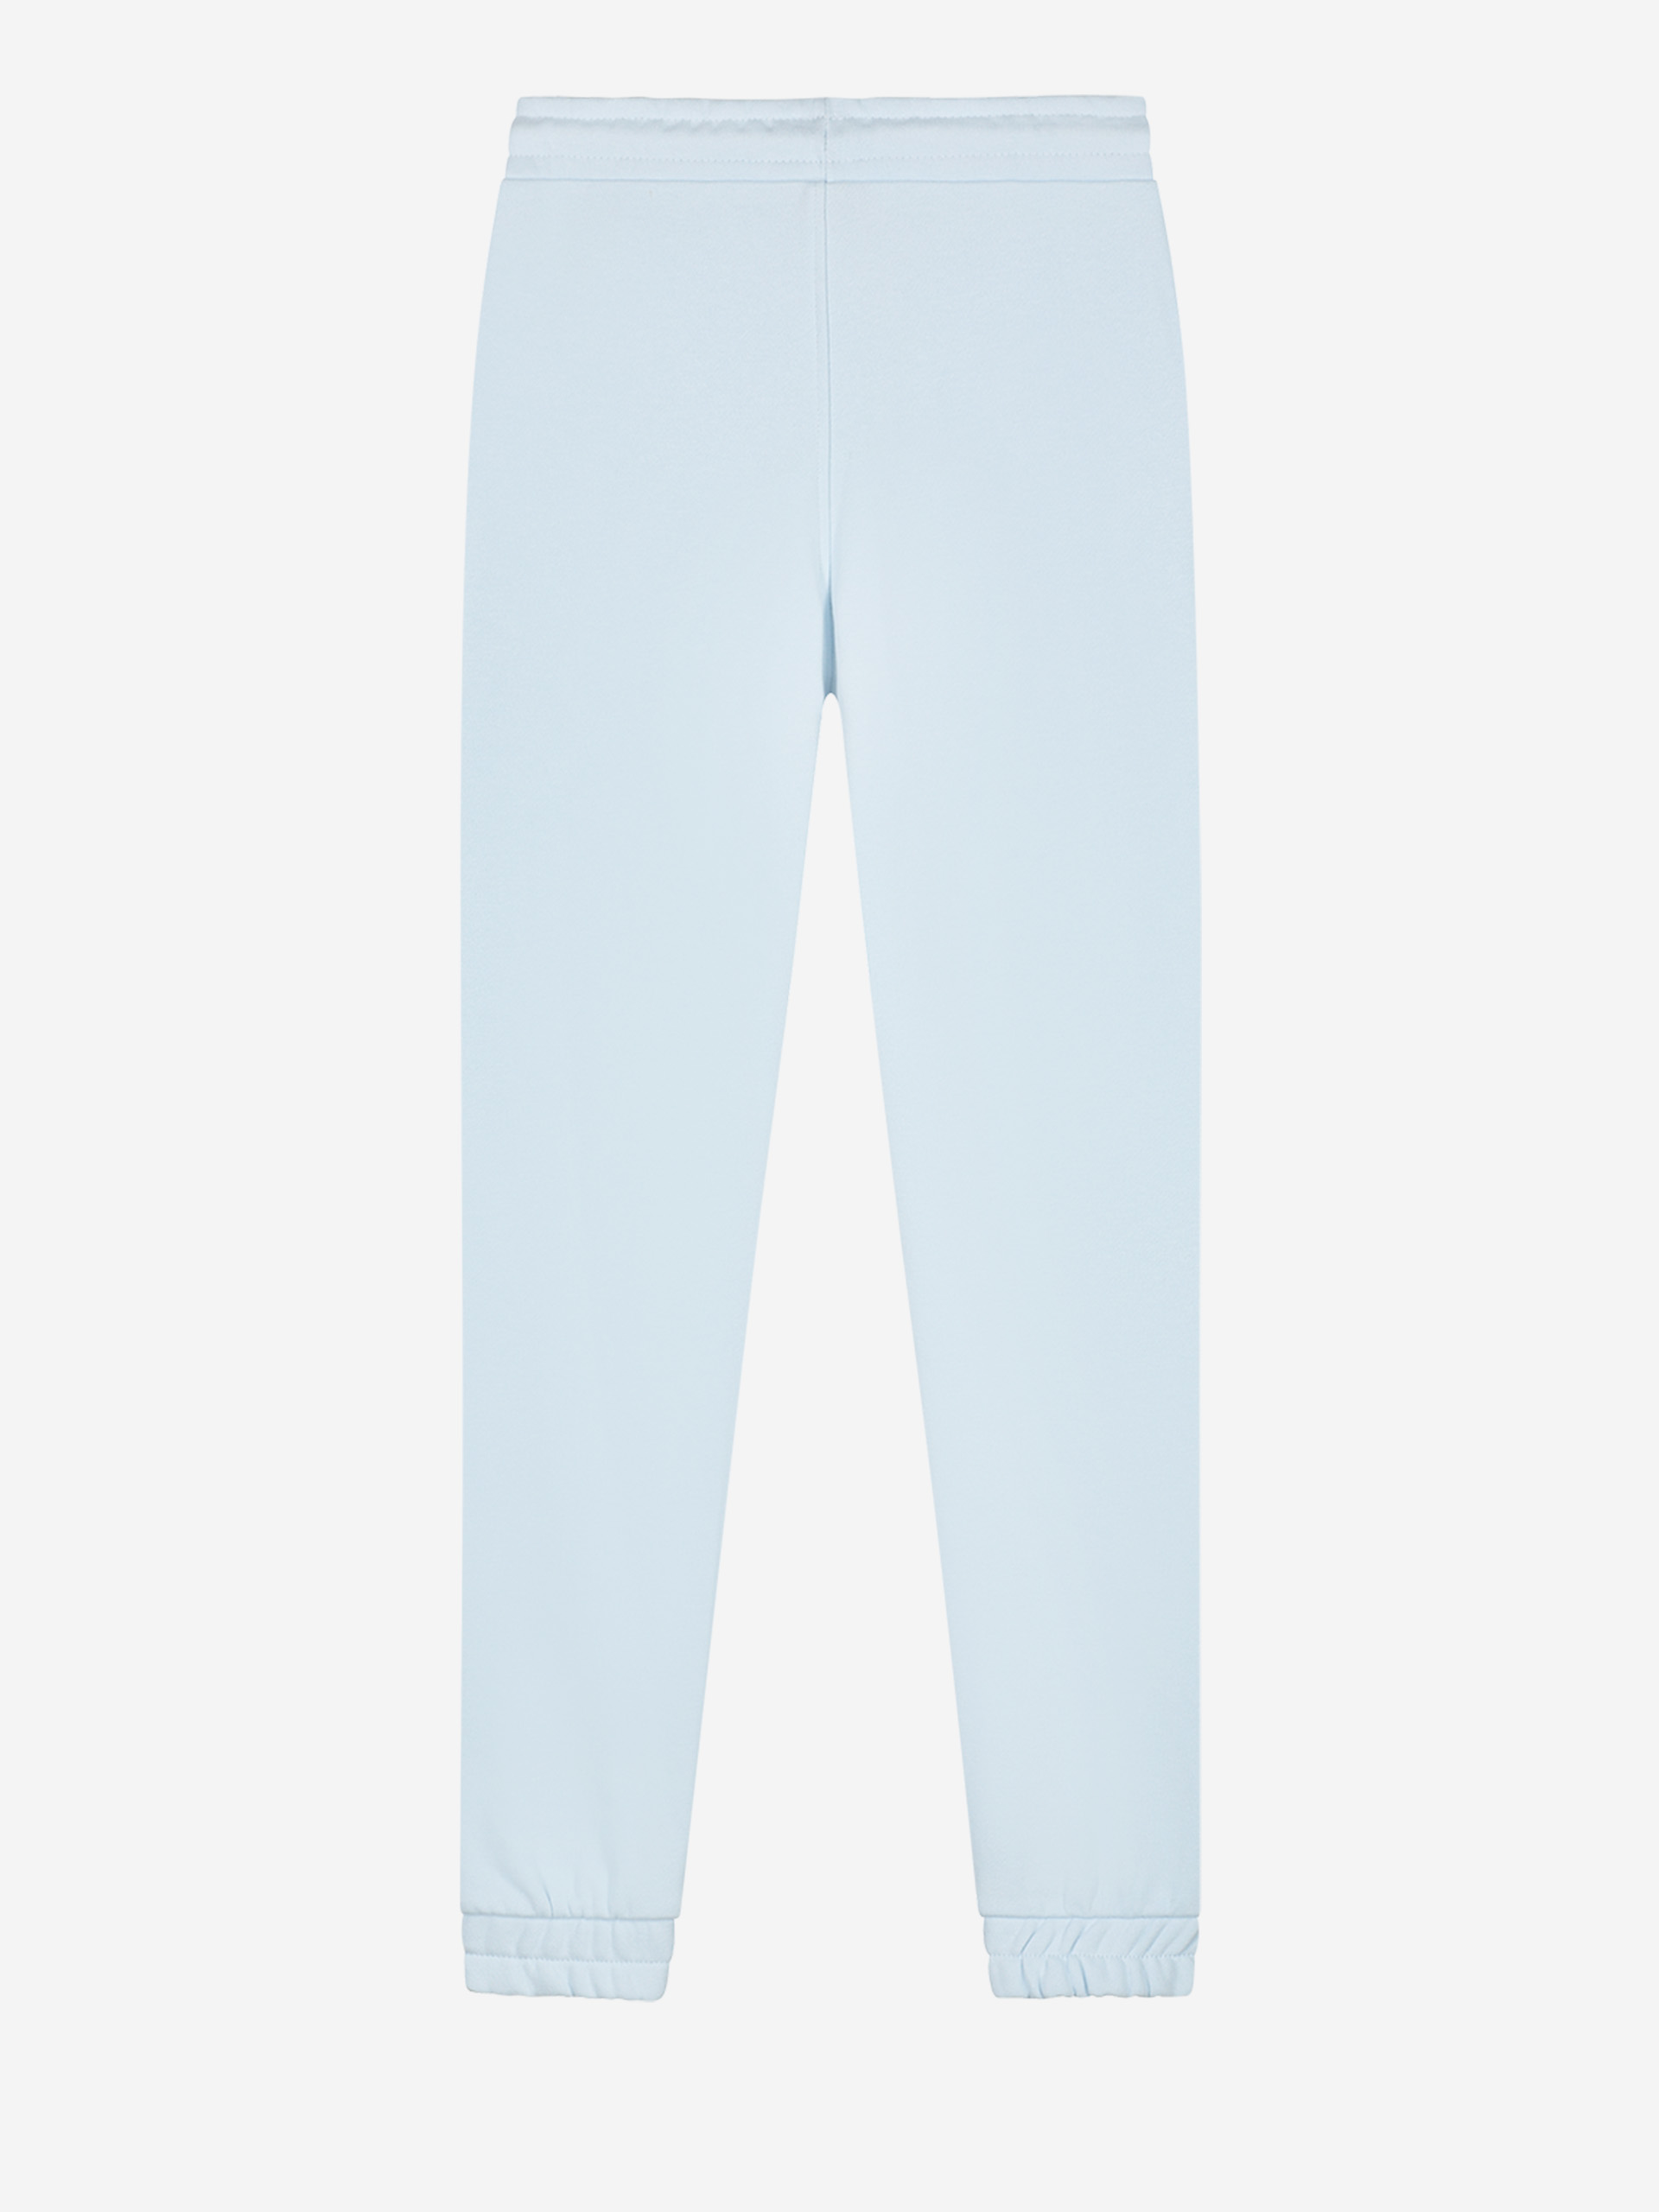 One collection forward sweatpants